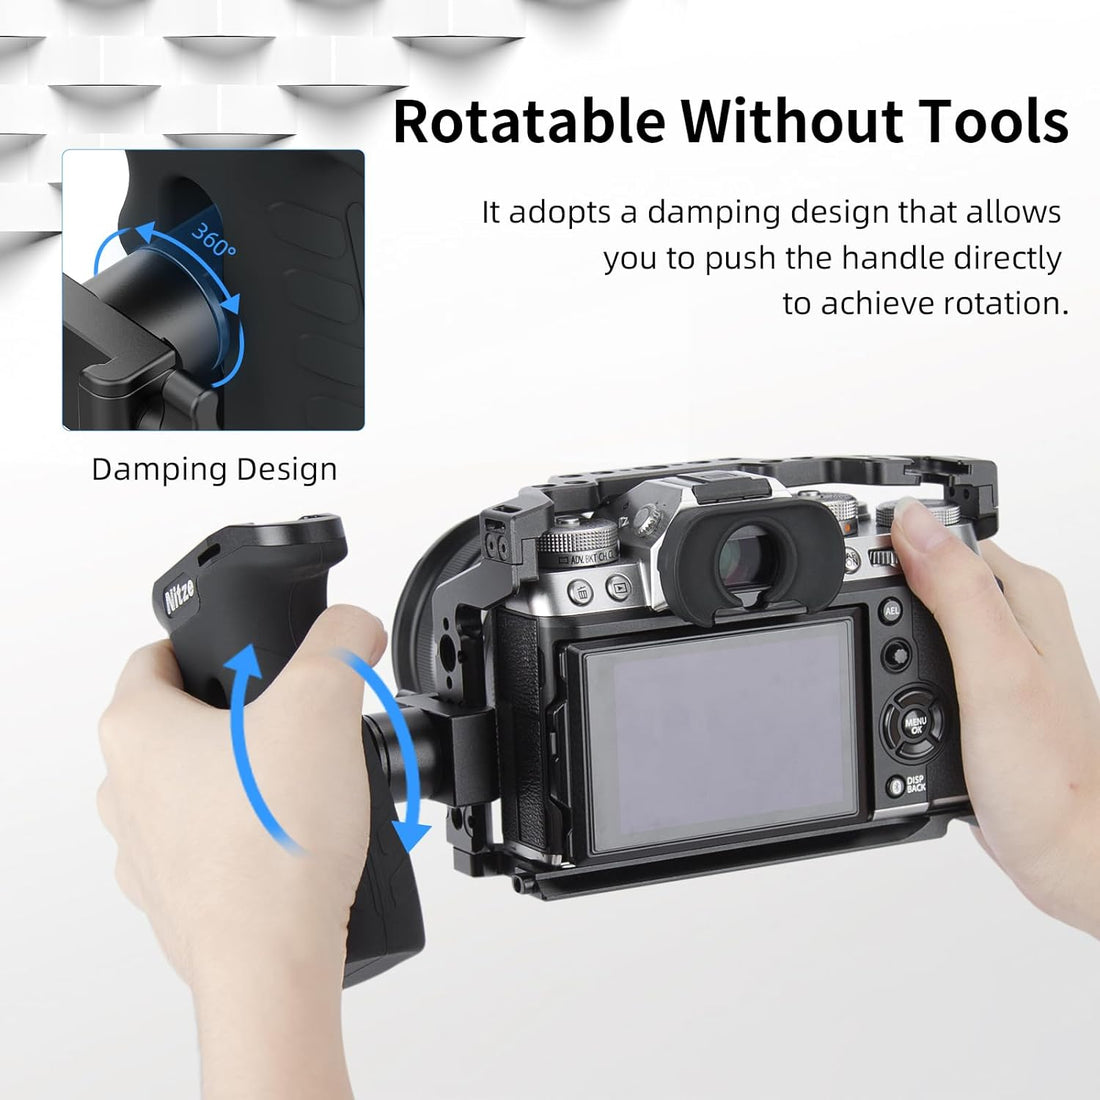 Nitze Rotatable Side Handle with NATO Clamp, 360° Rotatable NATO Side Handle, Silicone-Covered Aluminum Camera Side Handle for DSLR/Mirorrless Camera Rigs and Monitor Rigs - PA29-F3